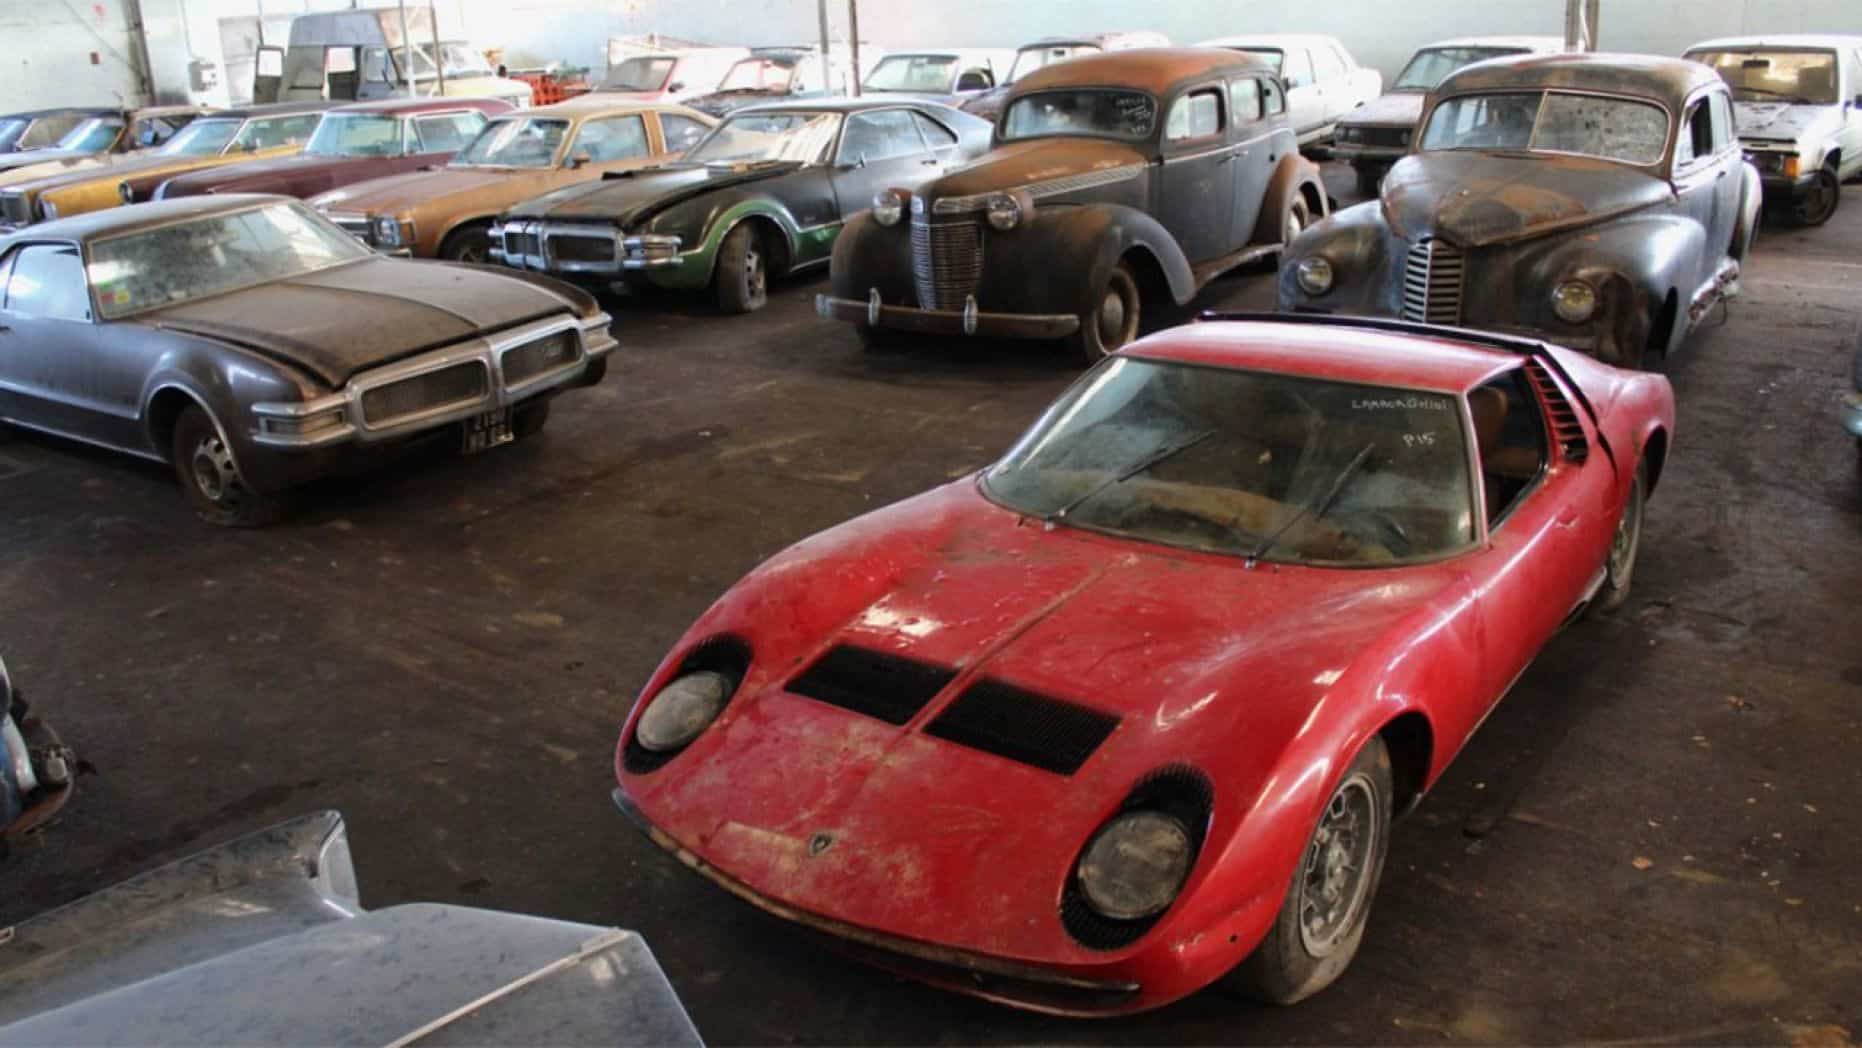 After French collector's death, more than 80 cars were discovered in buildings and outdoors, including a Lamborghini Miura. The big barn find will be offered at auction. | Interencheres photo